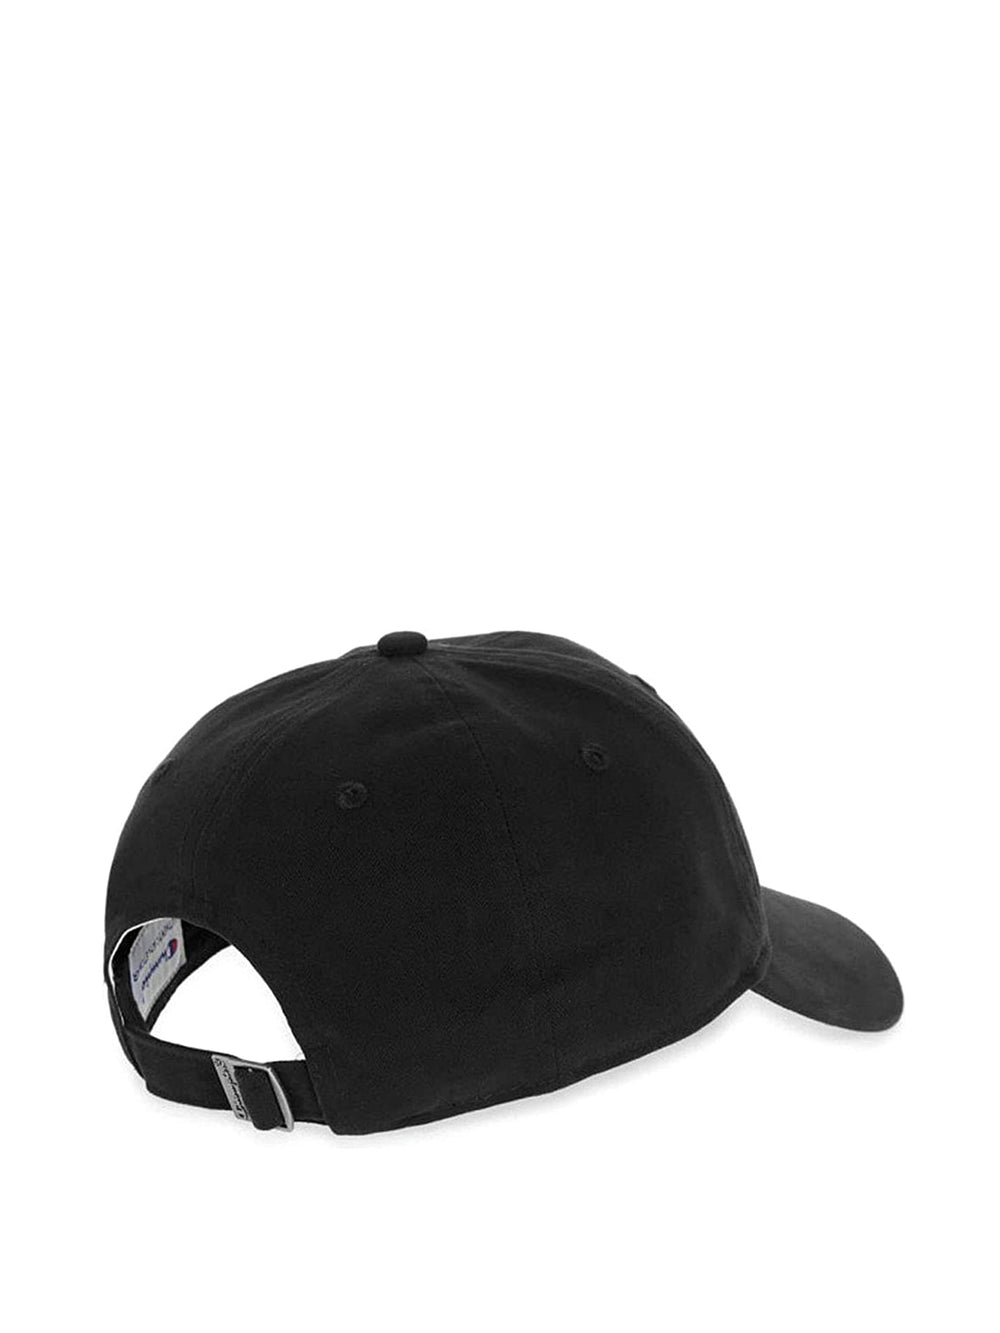 CHAMPION GARMENT WASHED DAD HAT - BLACK - CLEARANCE